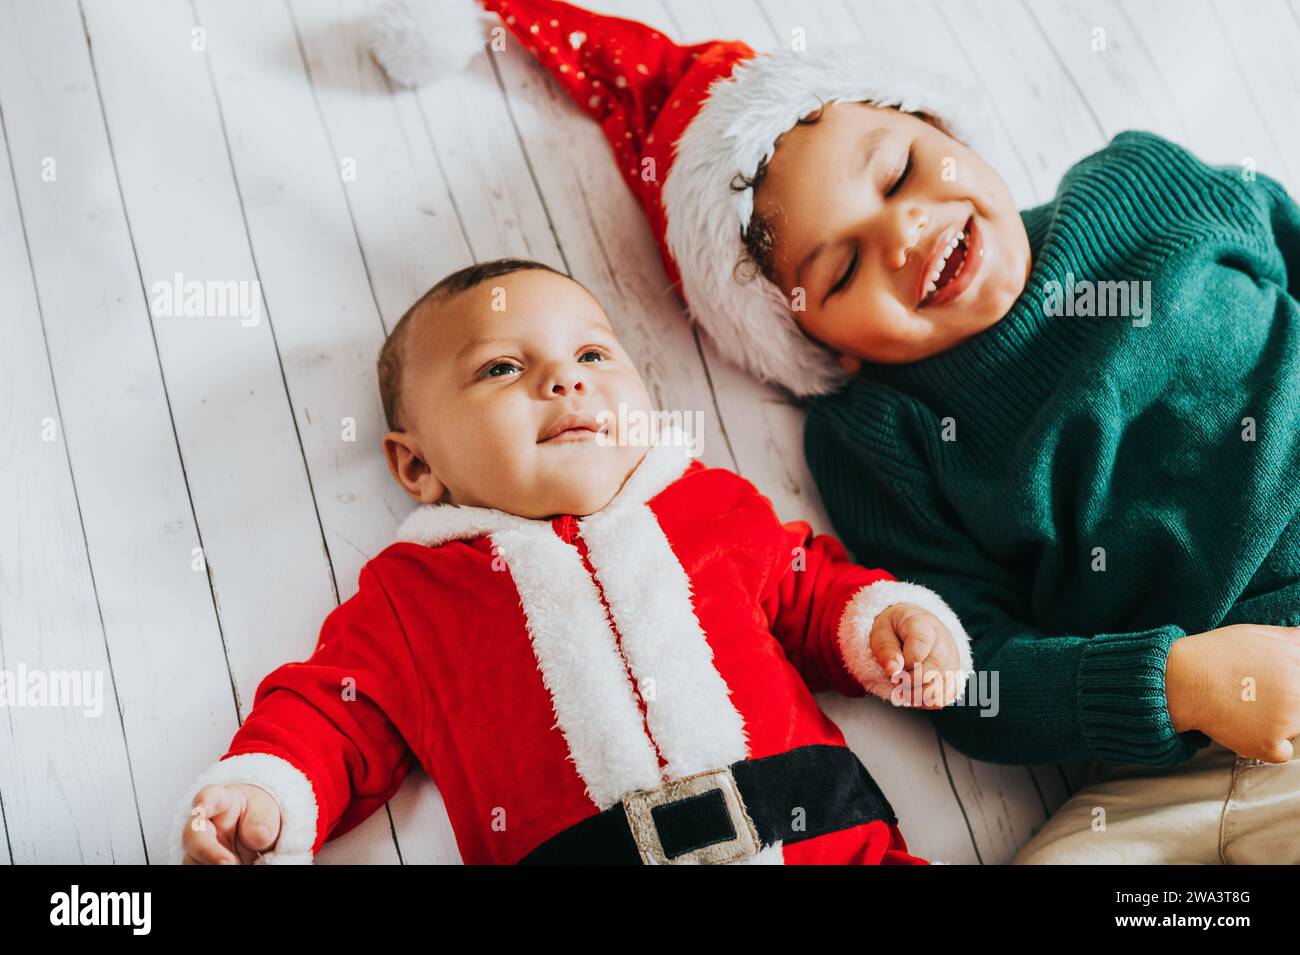 Image of two funny boys wearing christmas outfit, top view Stock Photo